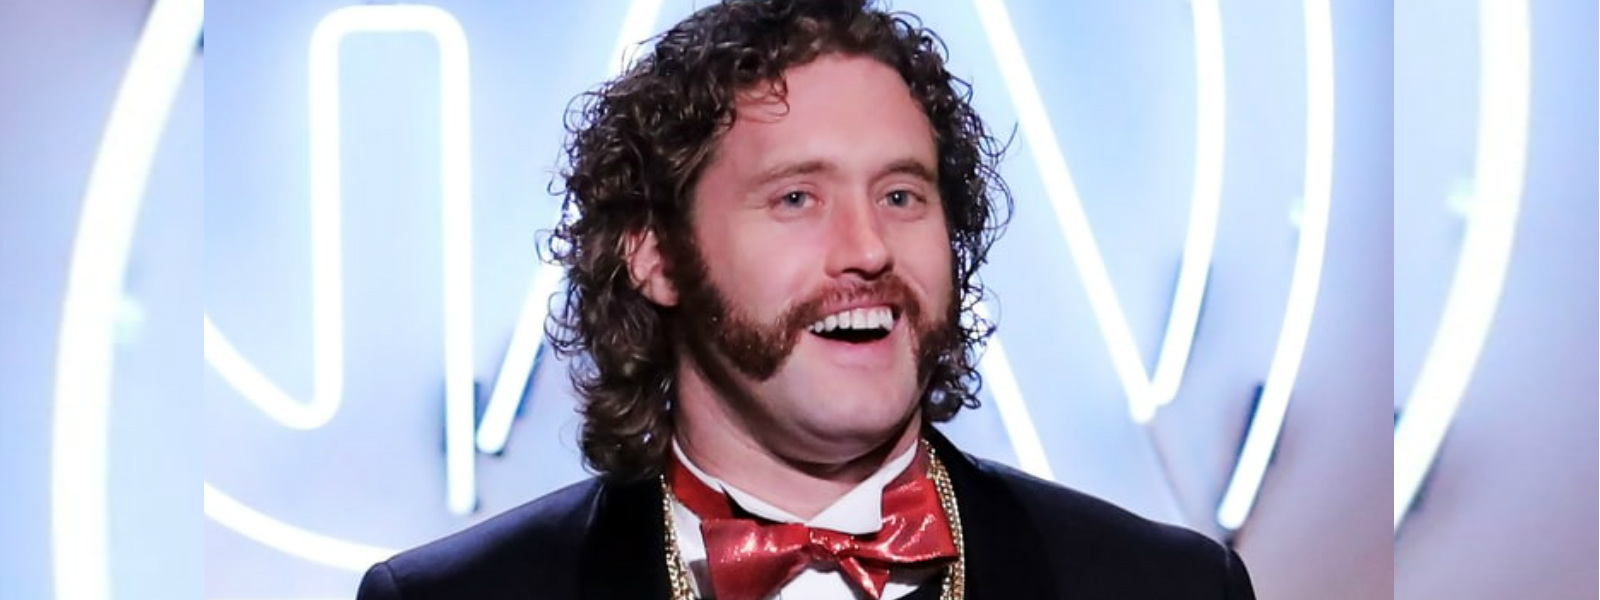 T J Miller charged over fake bomb threat 